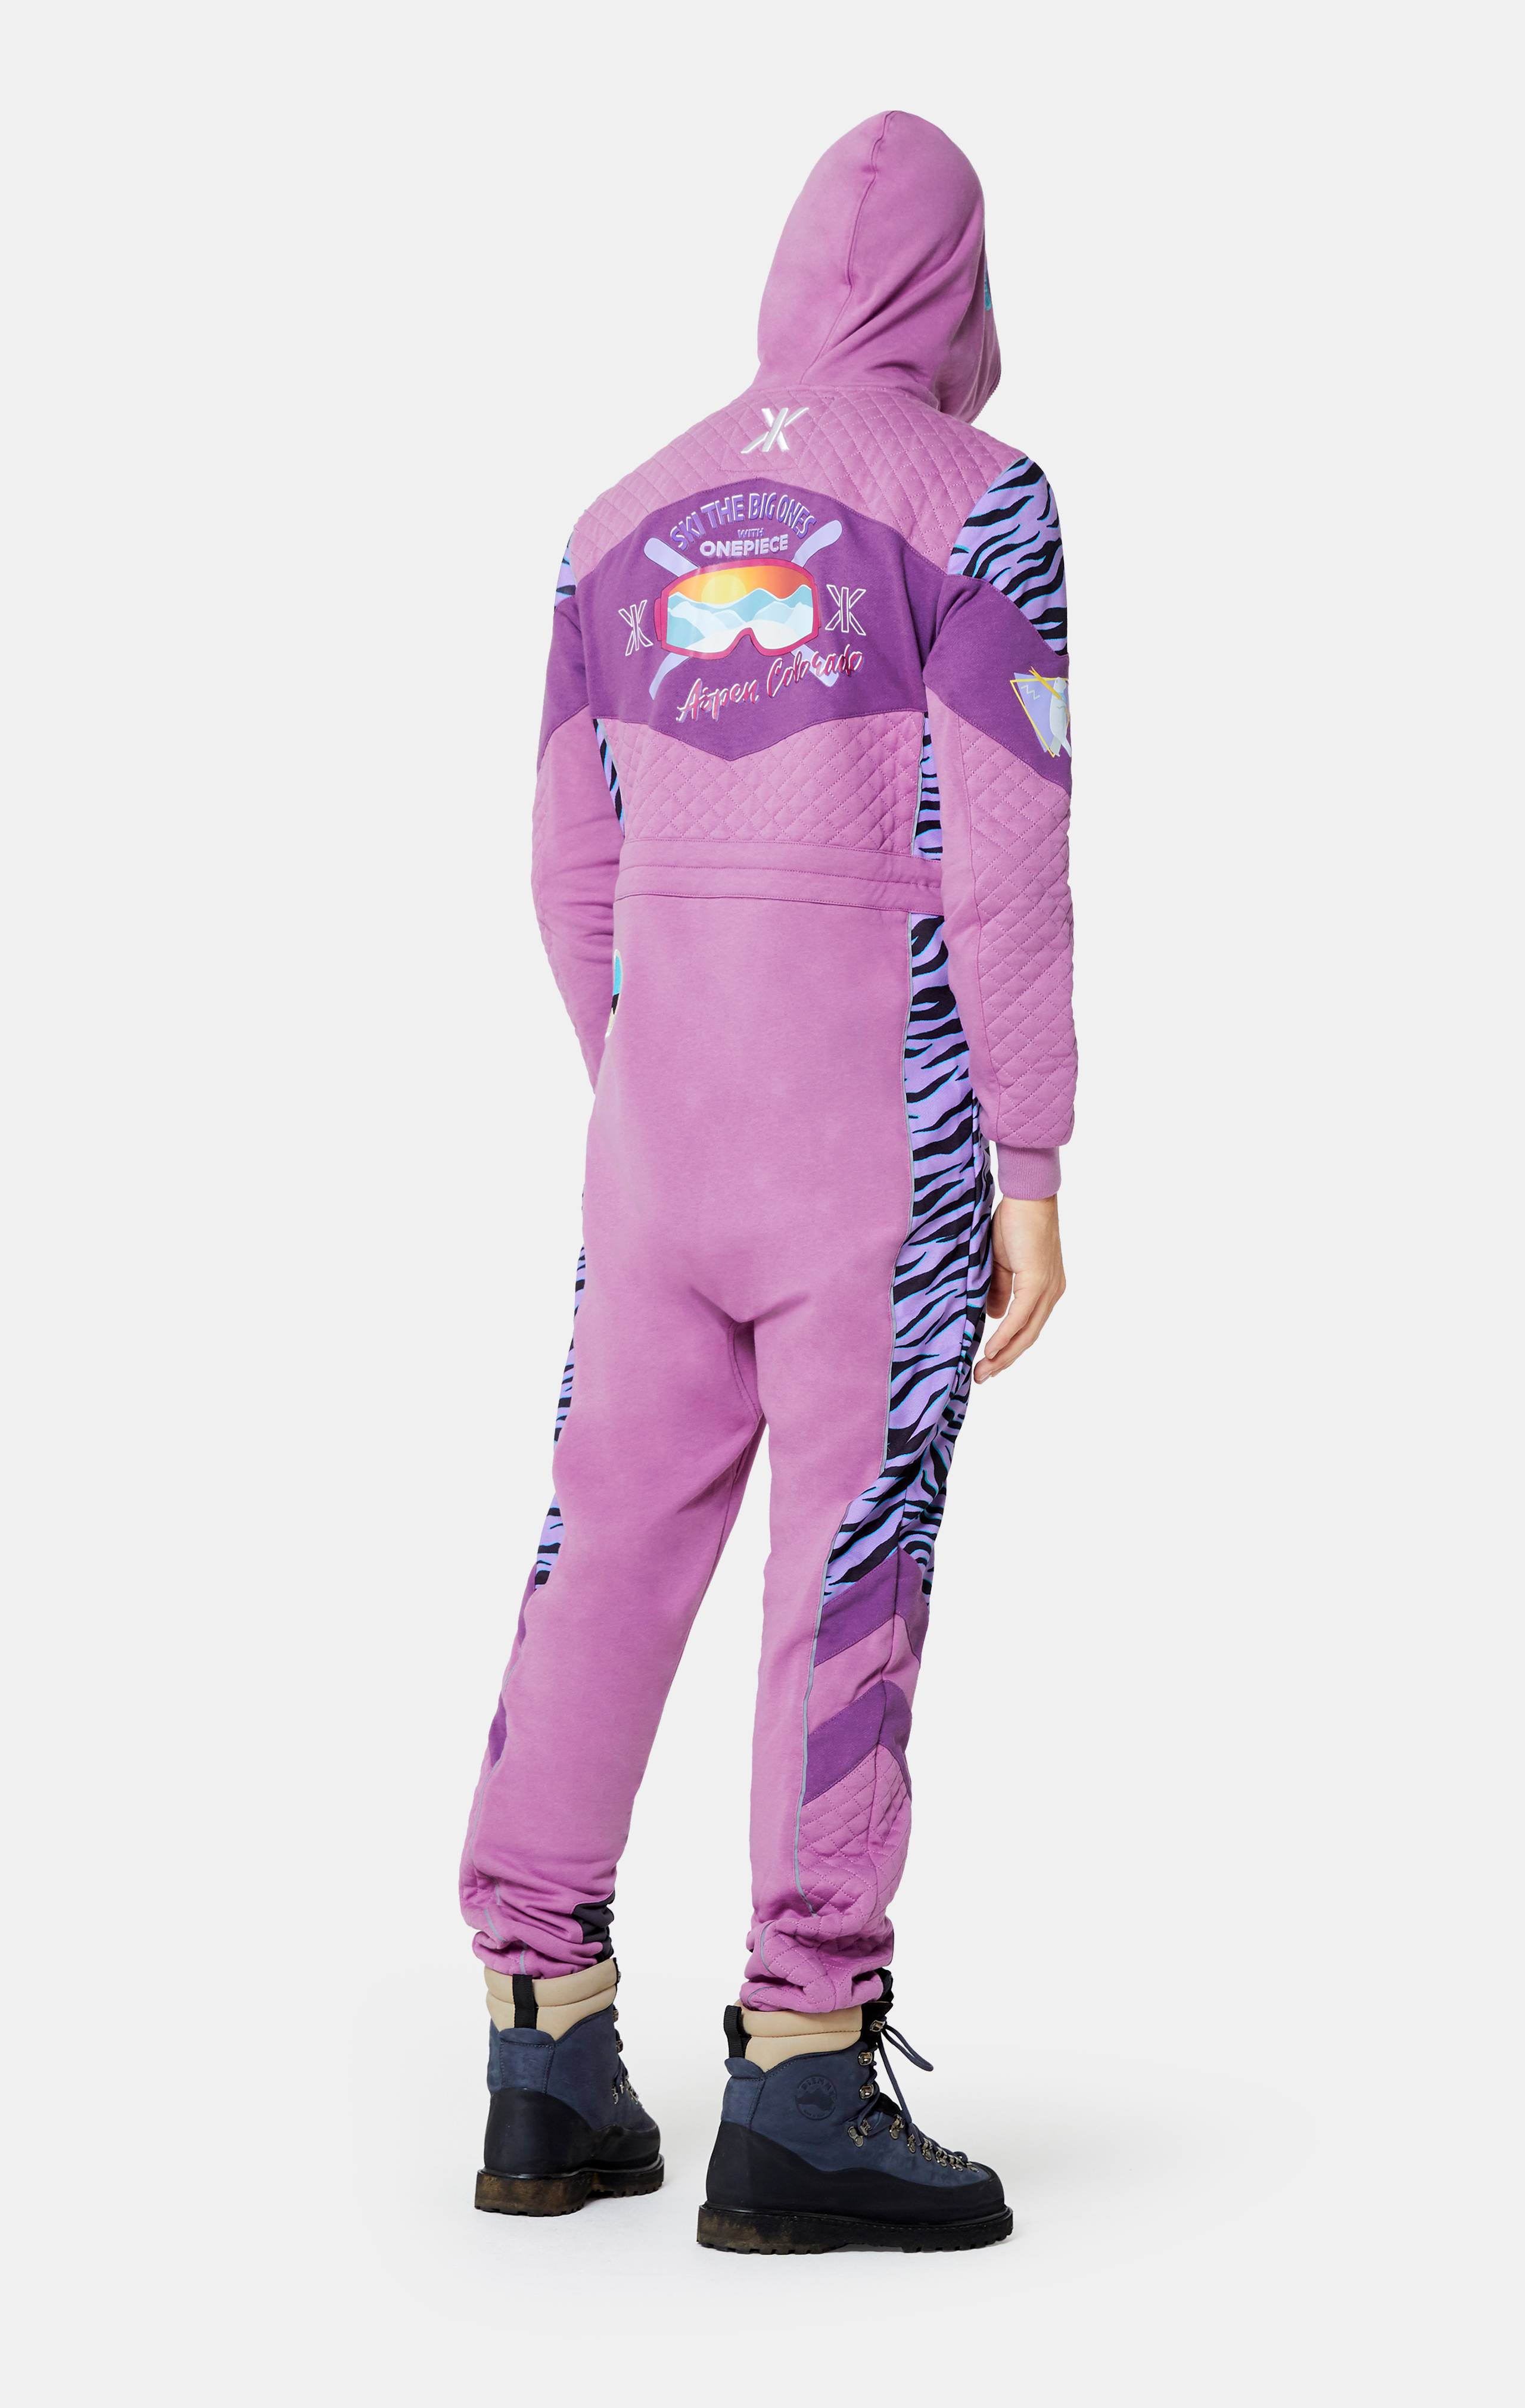 Onepiece Throwback Skiing Jumpsuit Pink - 6